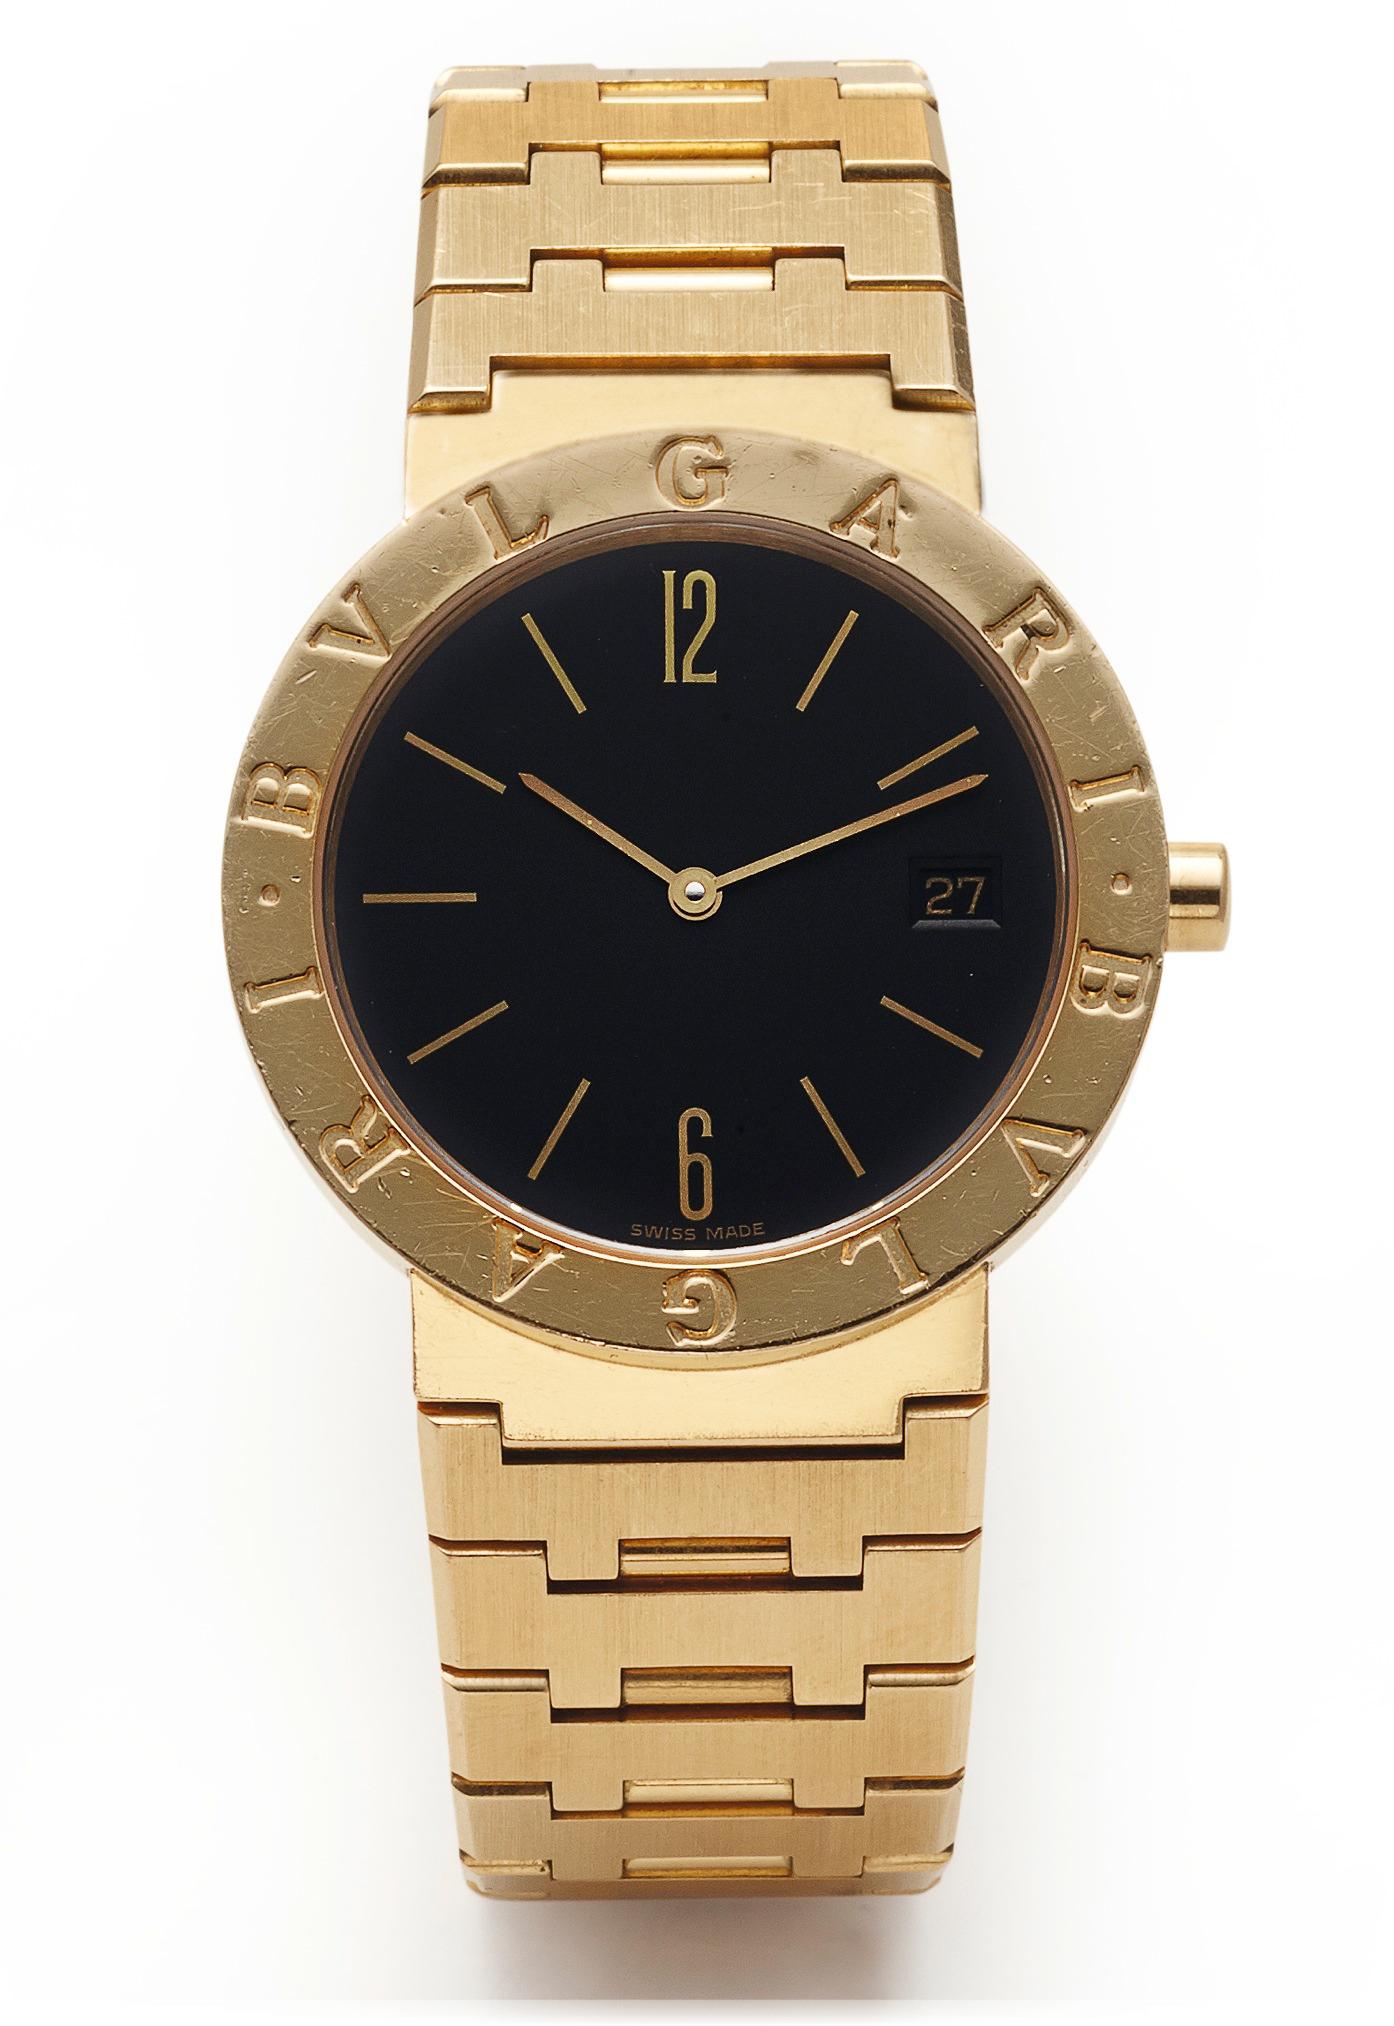 Bulgari Ref. BB 33 GGD P.89968. Made in the 1990s. Fine, 18K yellow gold mid size quartz wristwatch with date and an integrated 18K yellow gold Bulgari link bracelet with deployant clasp. Two-body, polished and brushed, bezel engraved with